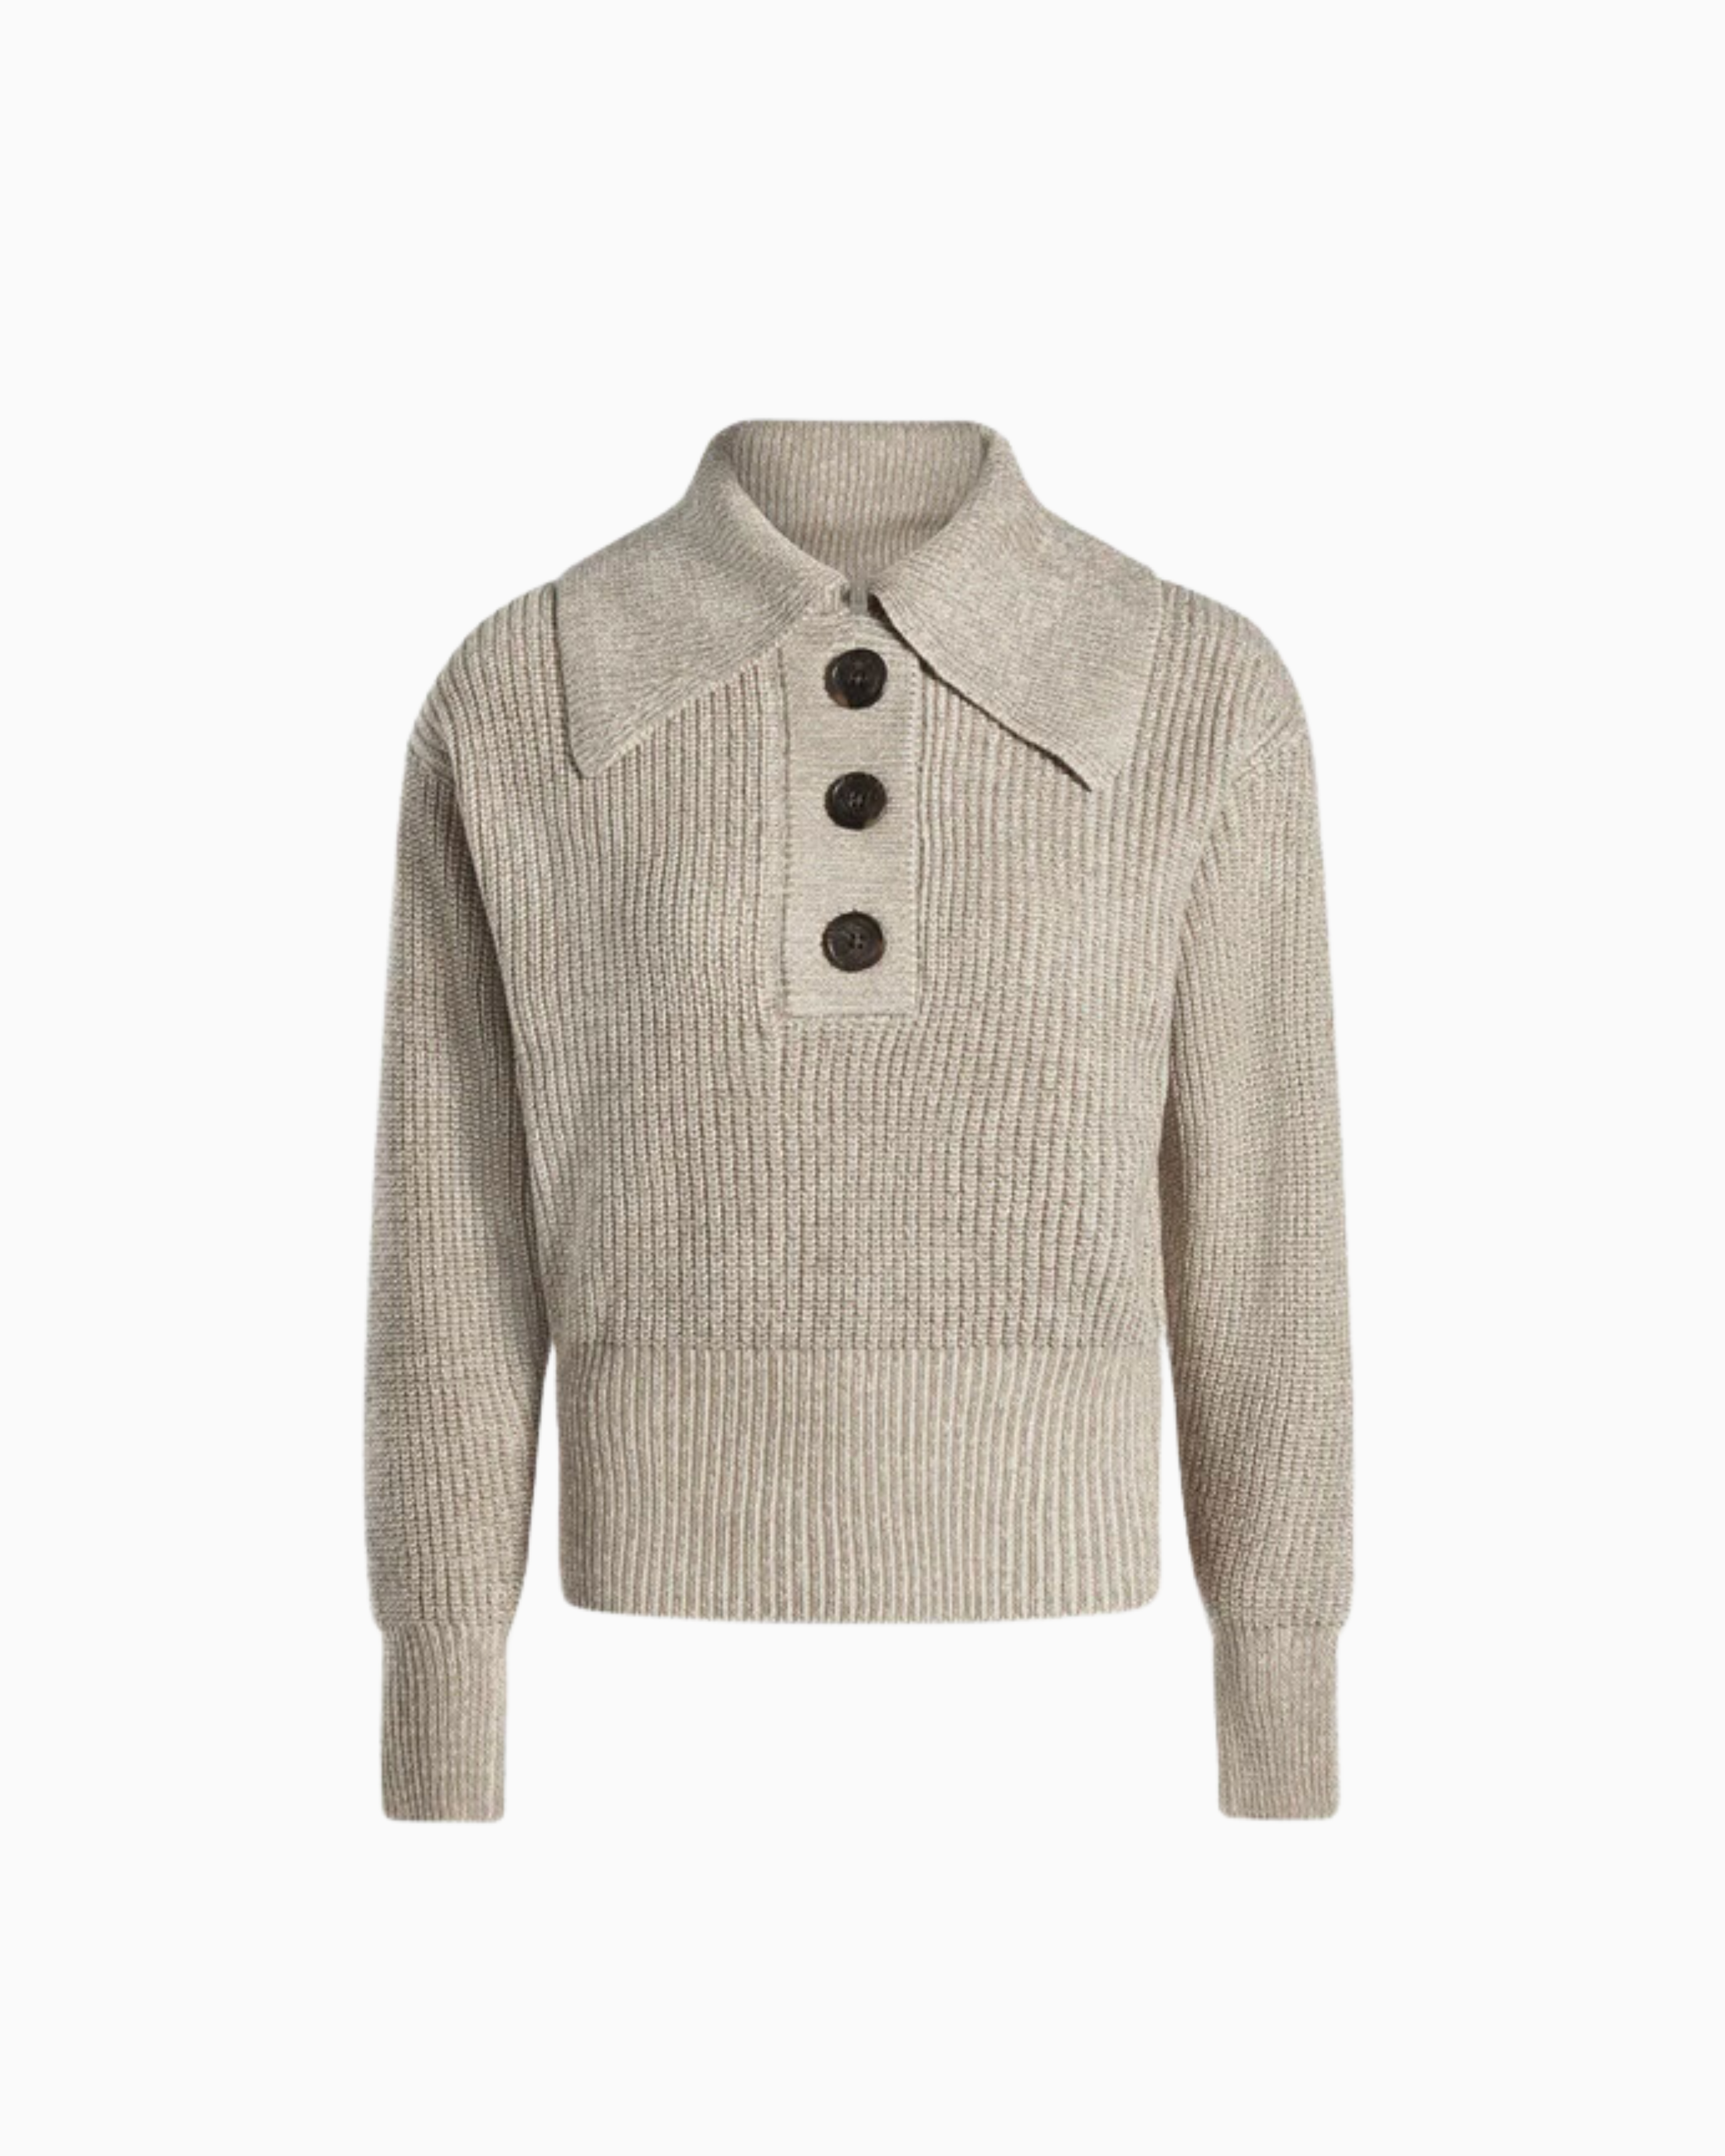 Varley Audrey Knit Polo in Olive Sand